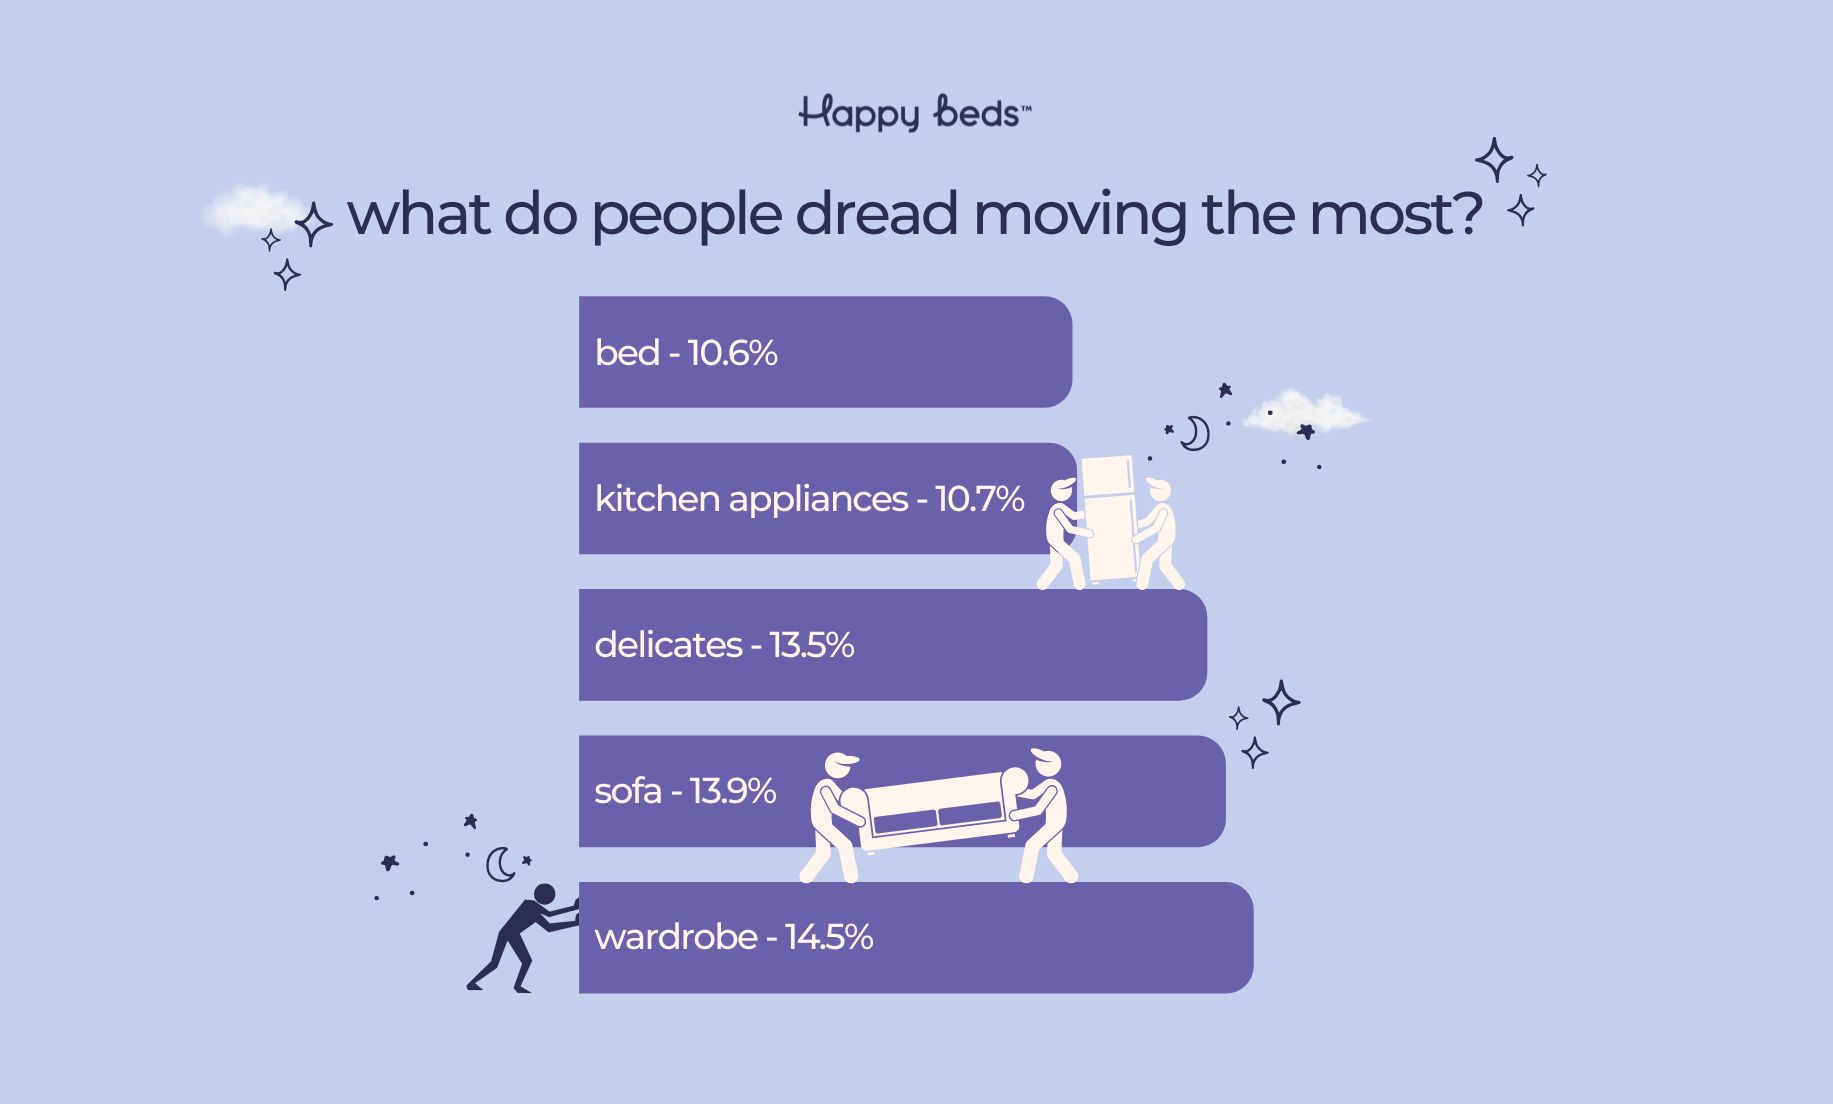 Which items do people dread moving the most?